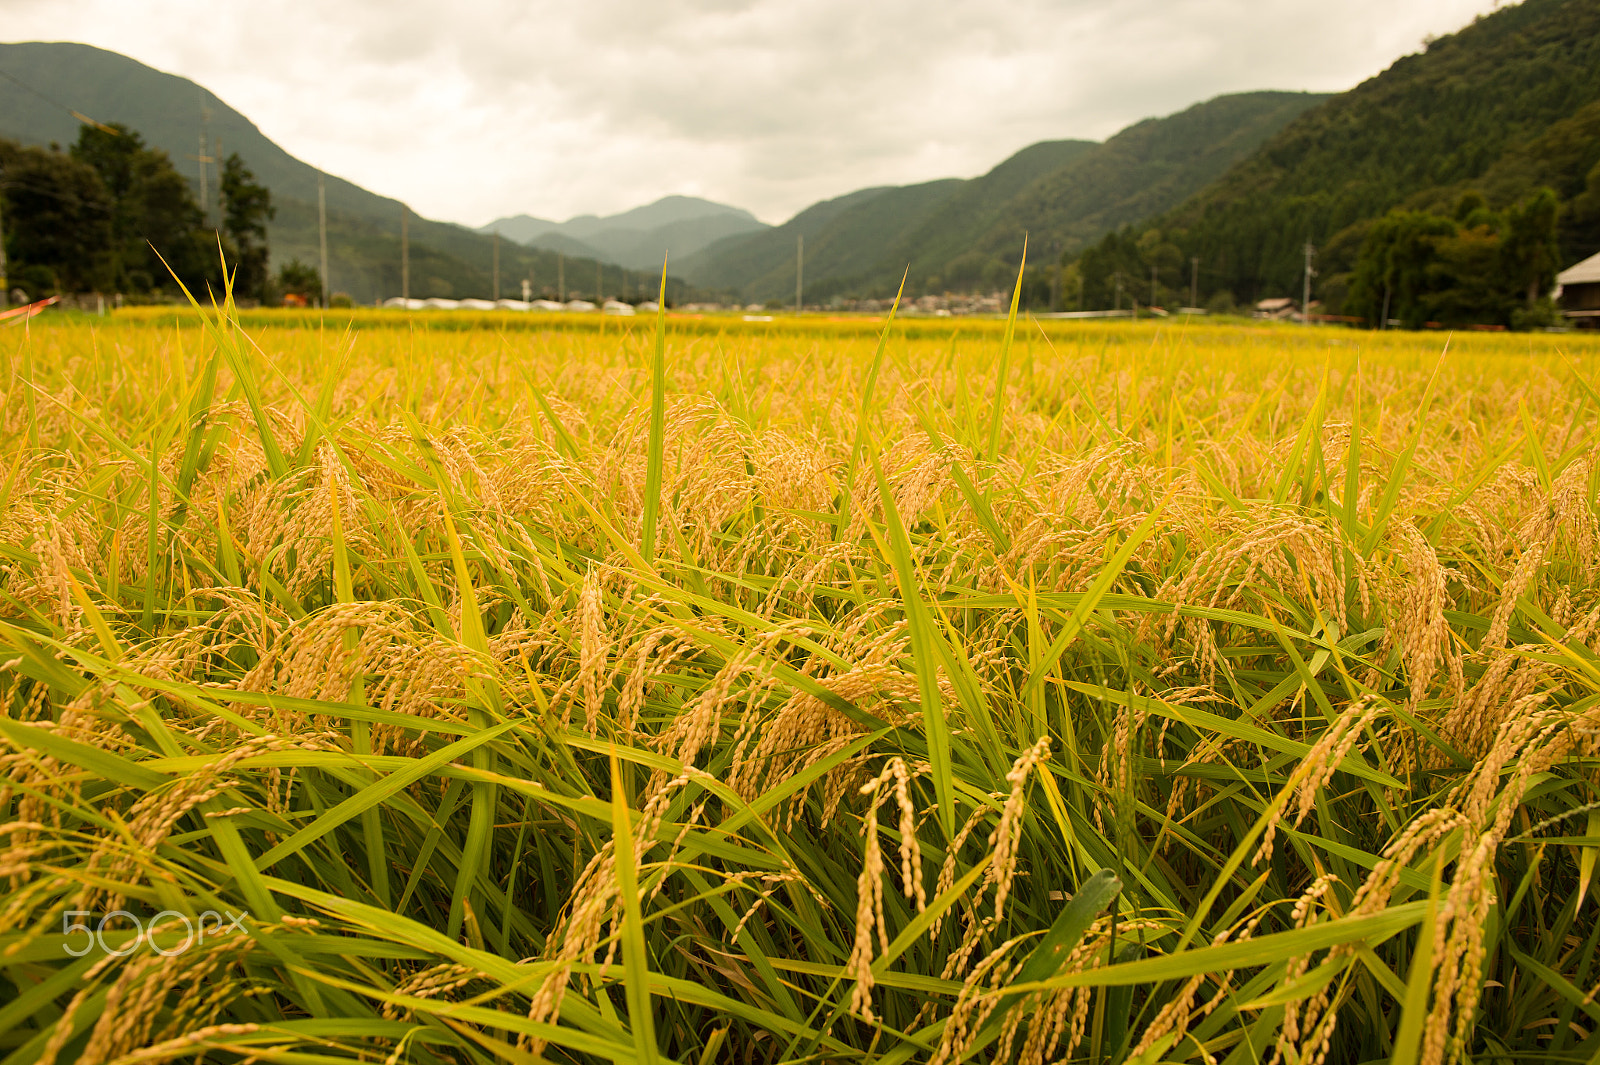 ZEISS Distagon T* 28mm F2 sample photo. The harvest season photography